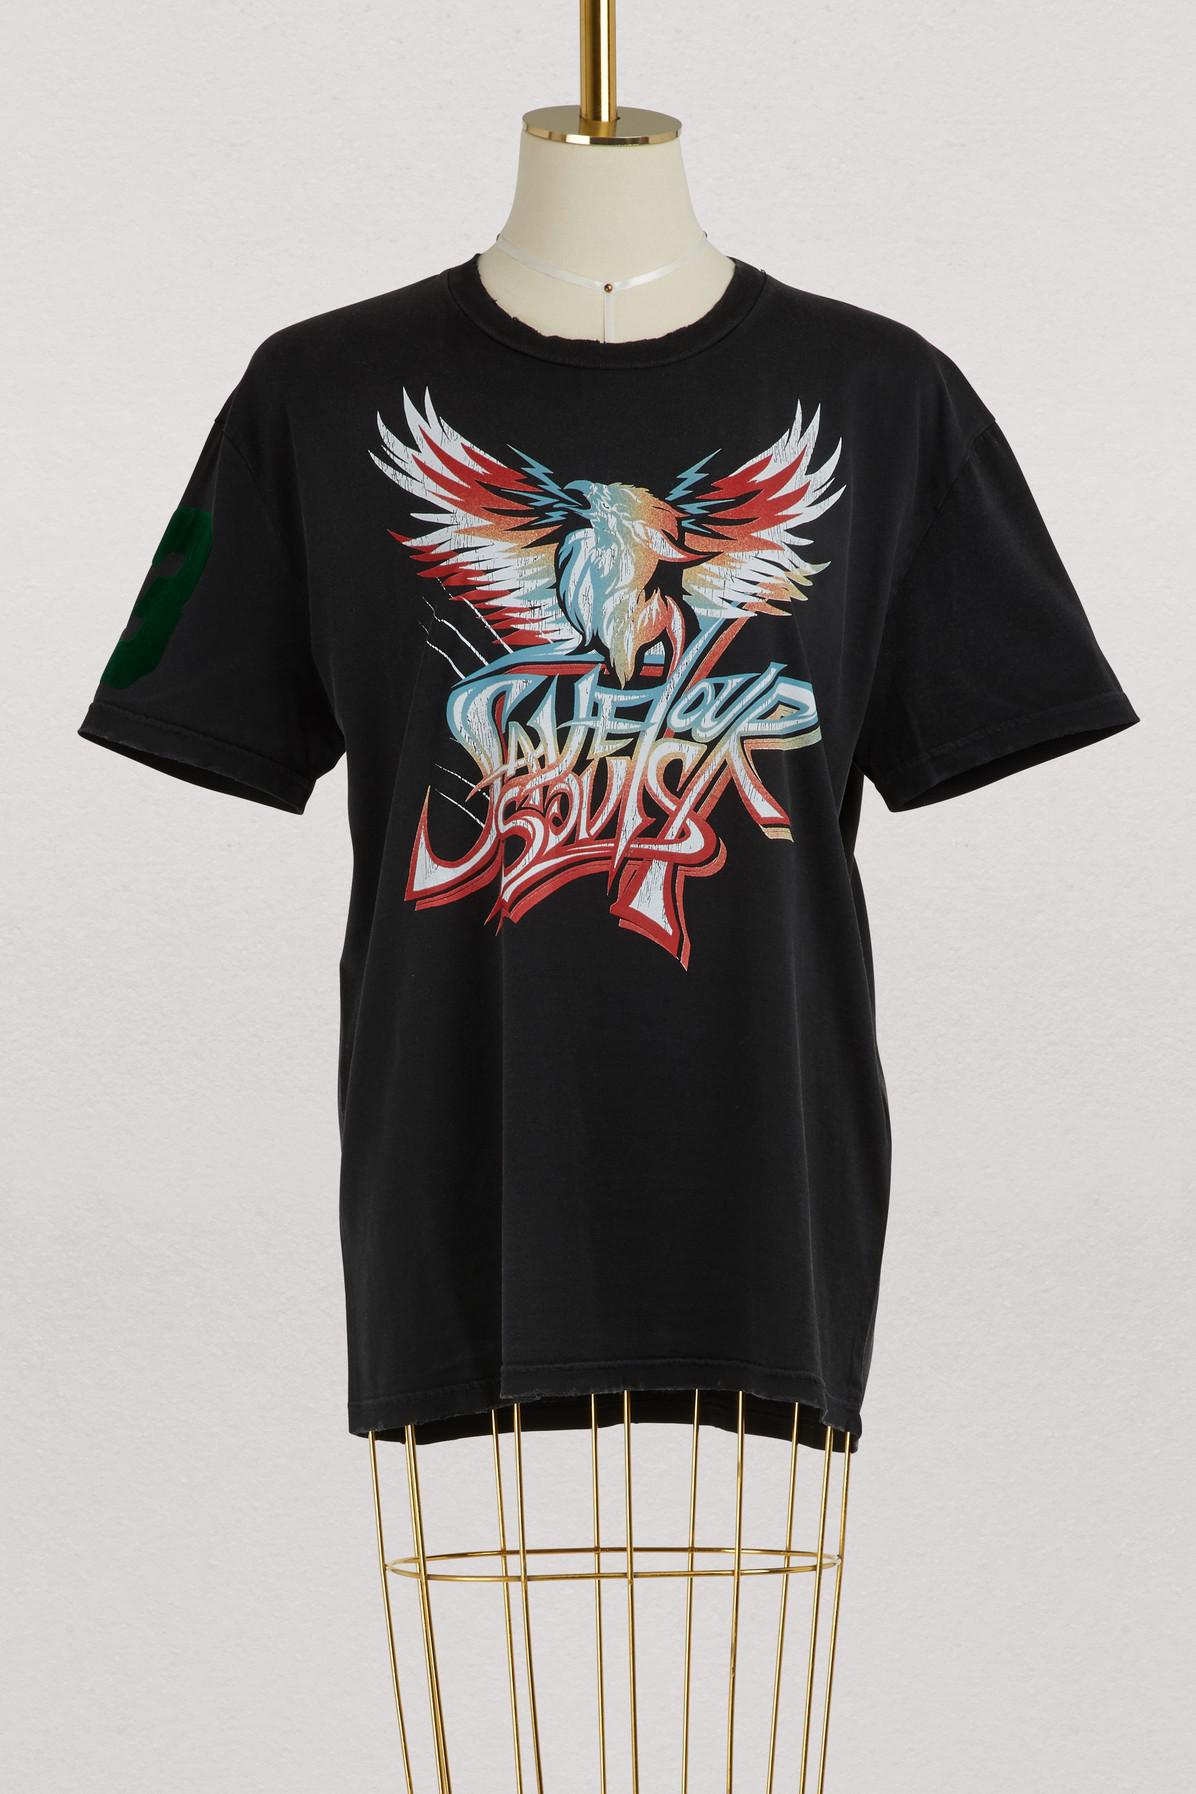 givenchy save our souls t shirt